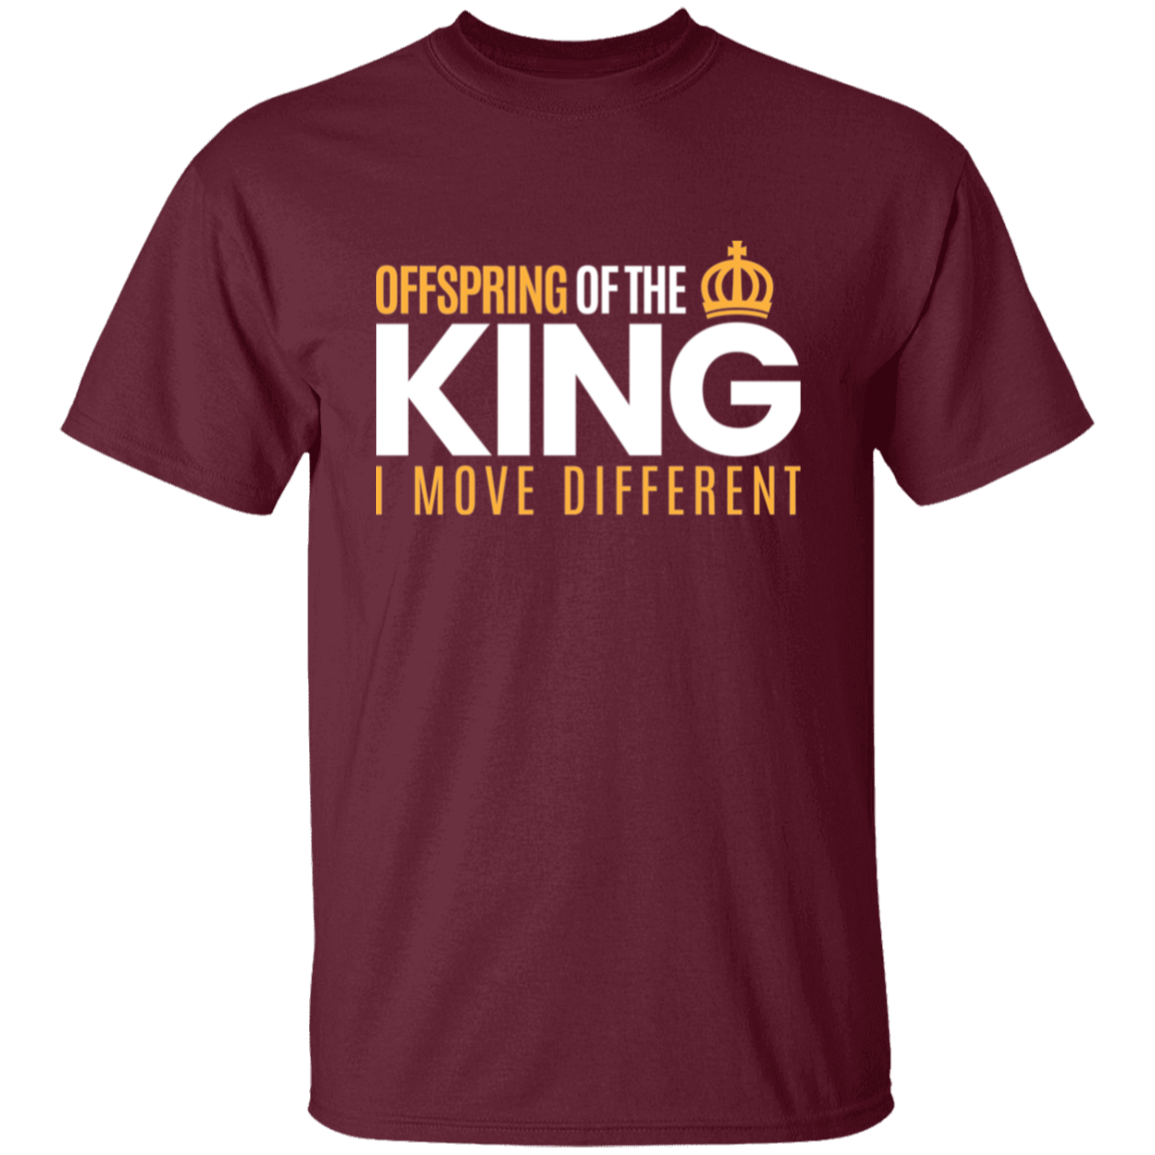 OFFSPRING OF THE KING